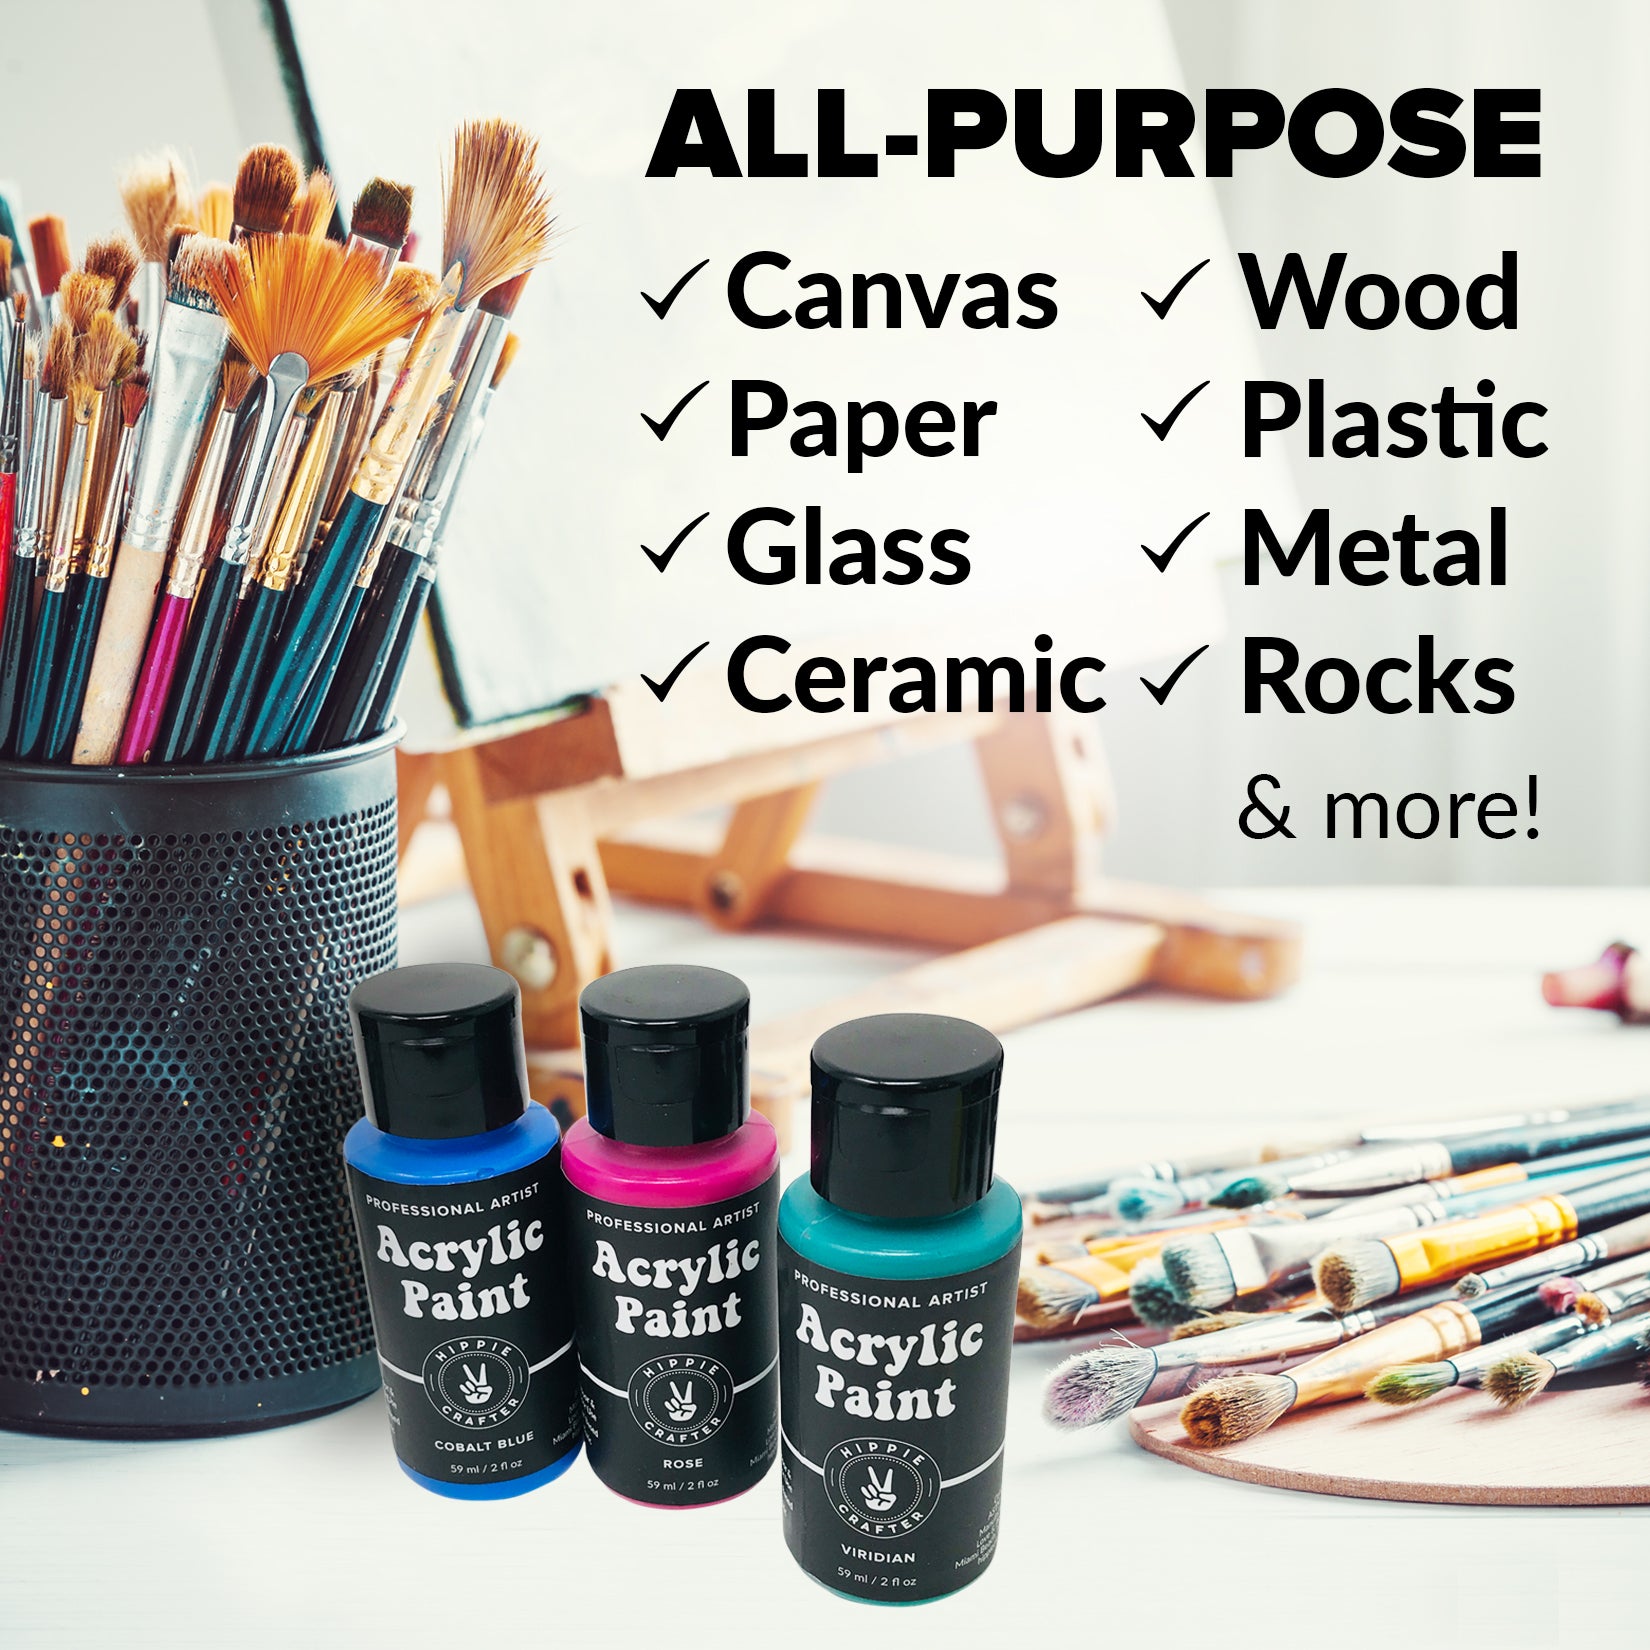 Extra Paint Set - Mail Me Roses